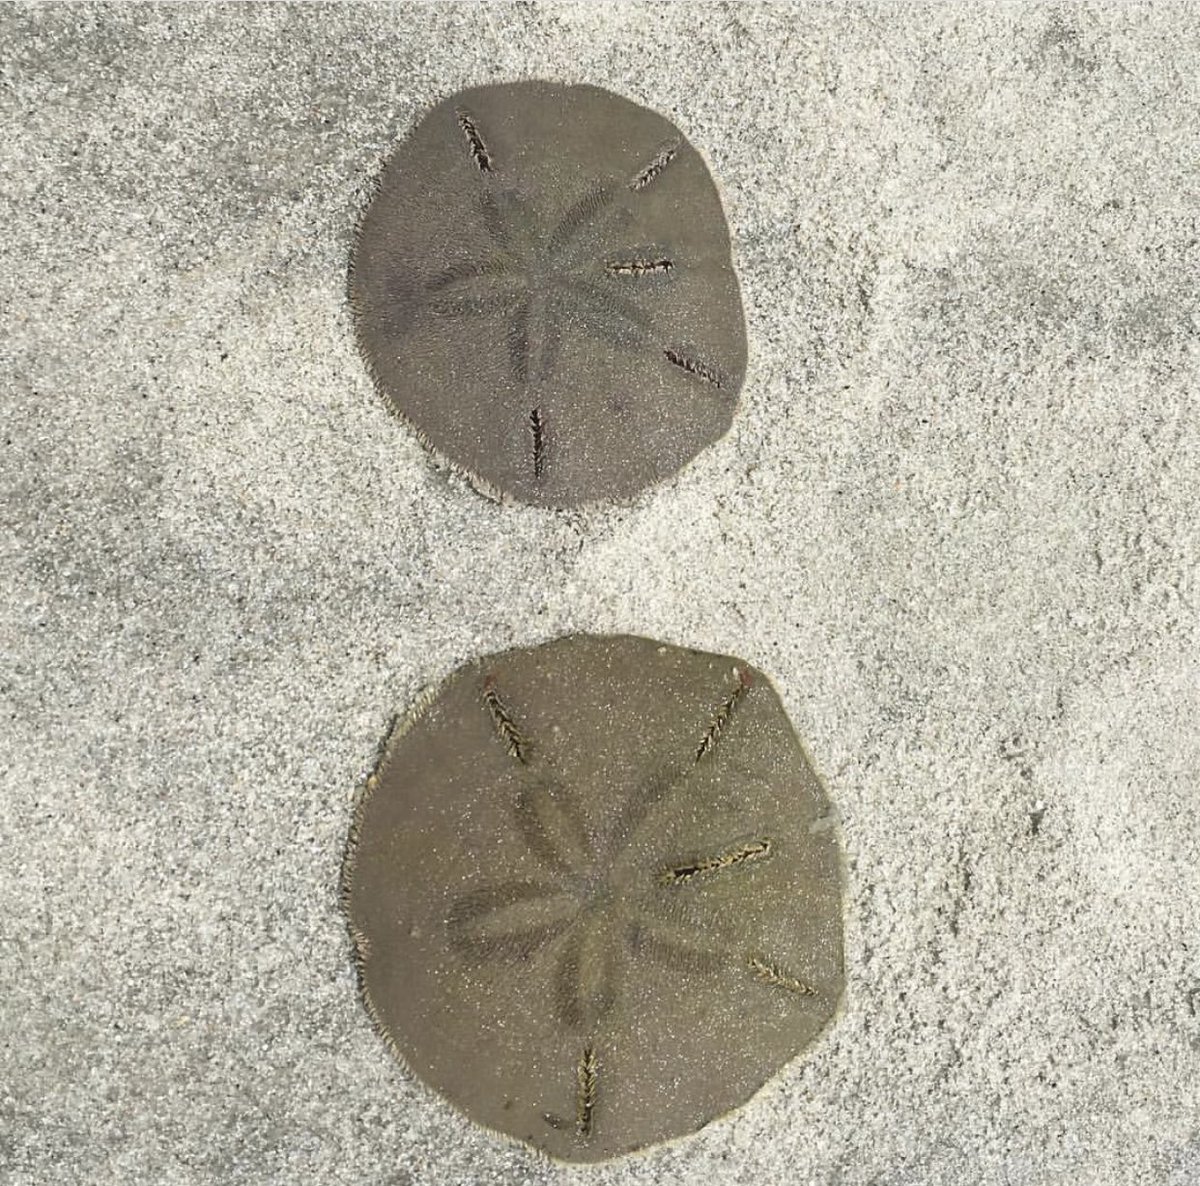 If you see a sand dollar or starfish, leave them in the water! If it’s washed up on the beach, please help them find their way back to the water. Just because they aren’t moving doesn’t mean they aren’t alive. 💕 @mermaidofhiltonhead #starfish #sanddollar #education #conserve